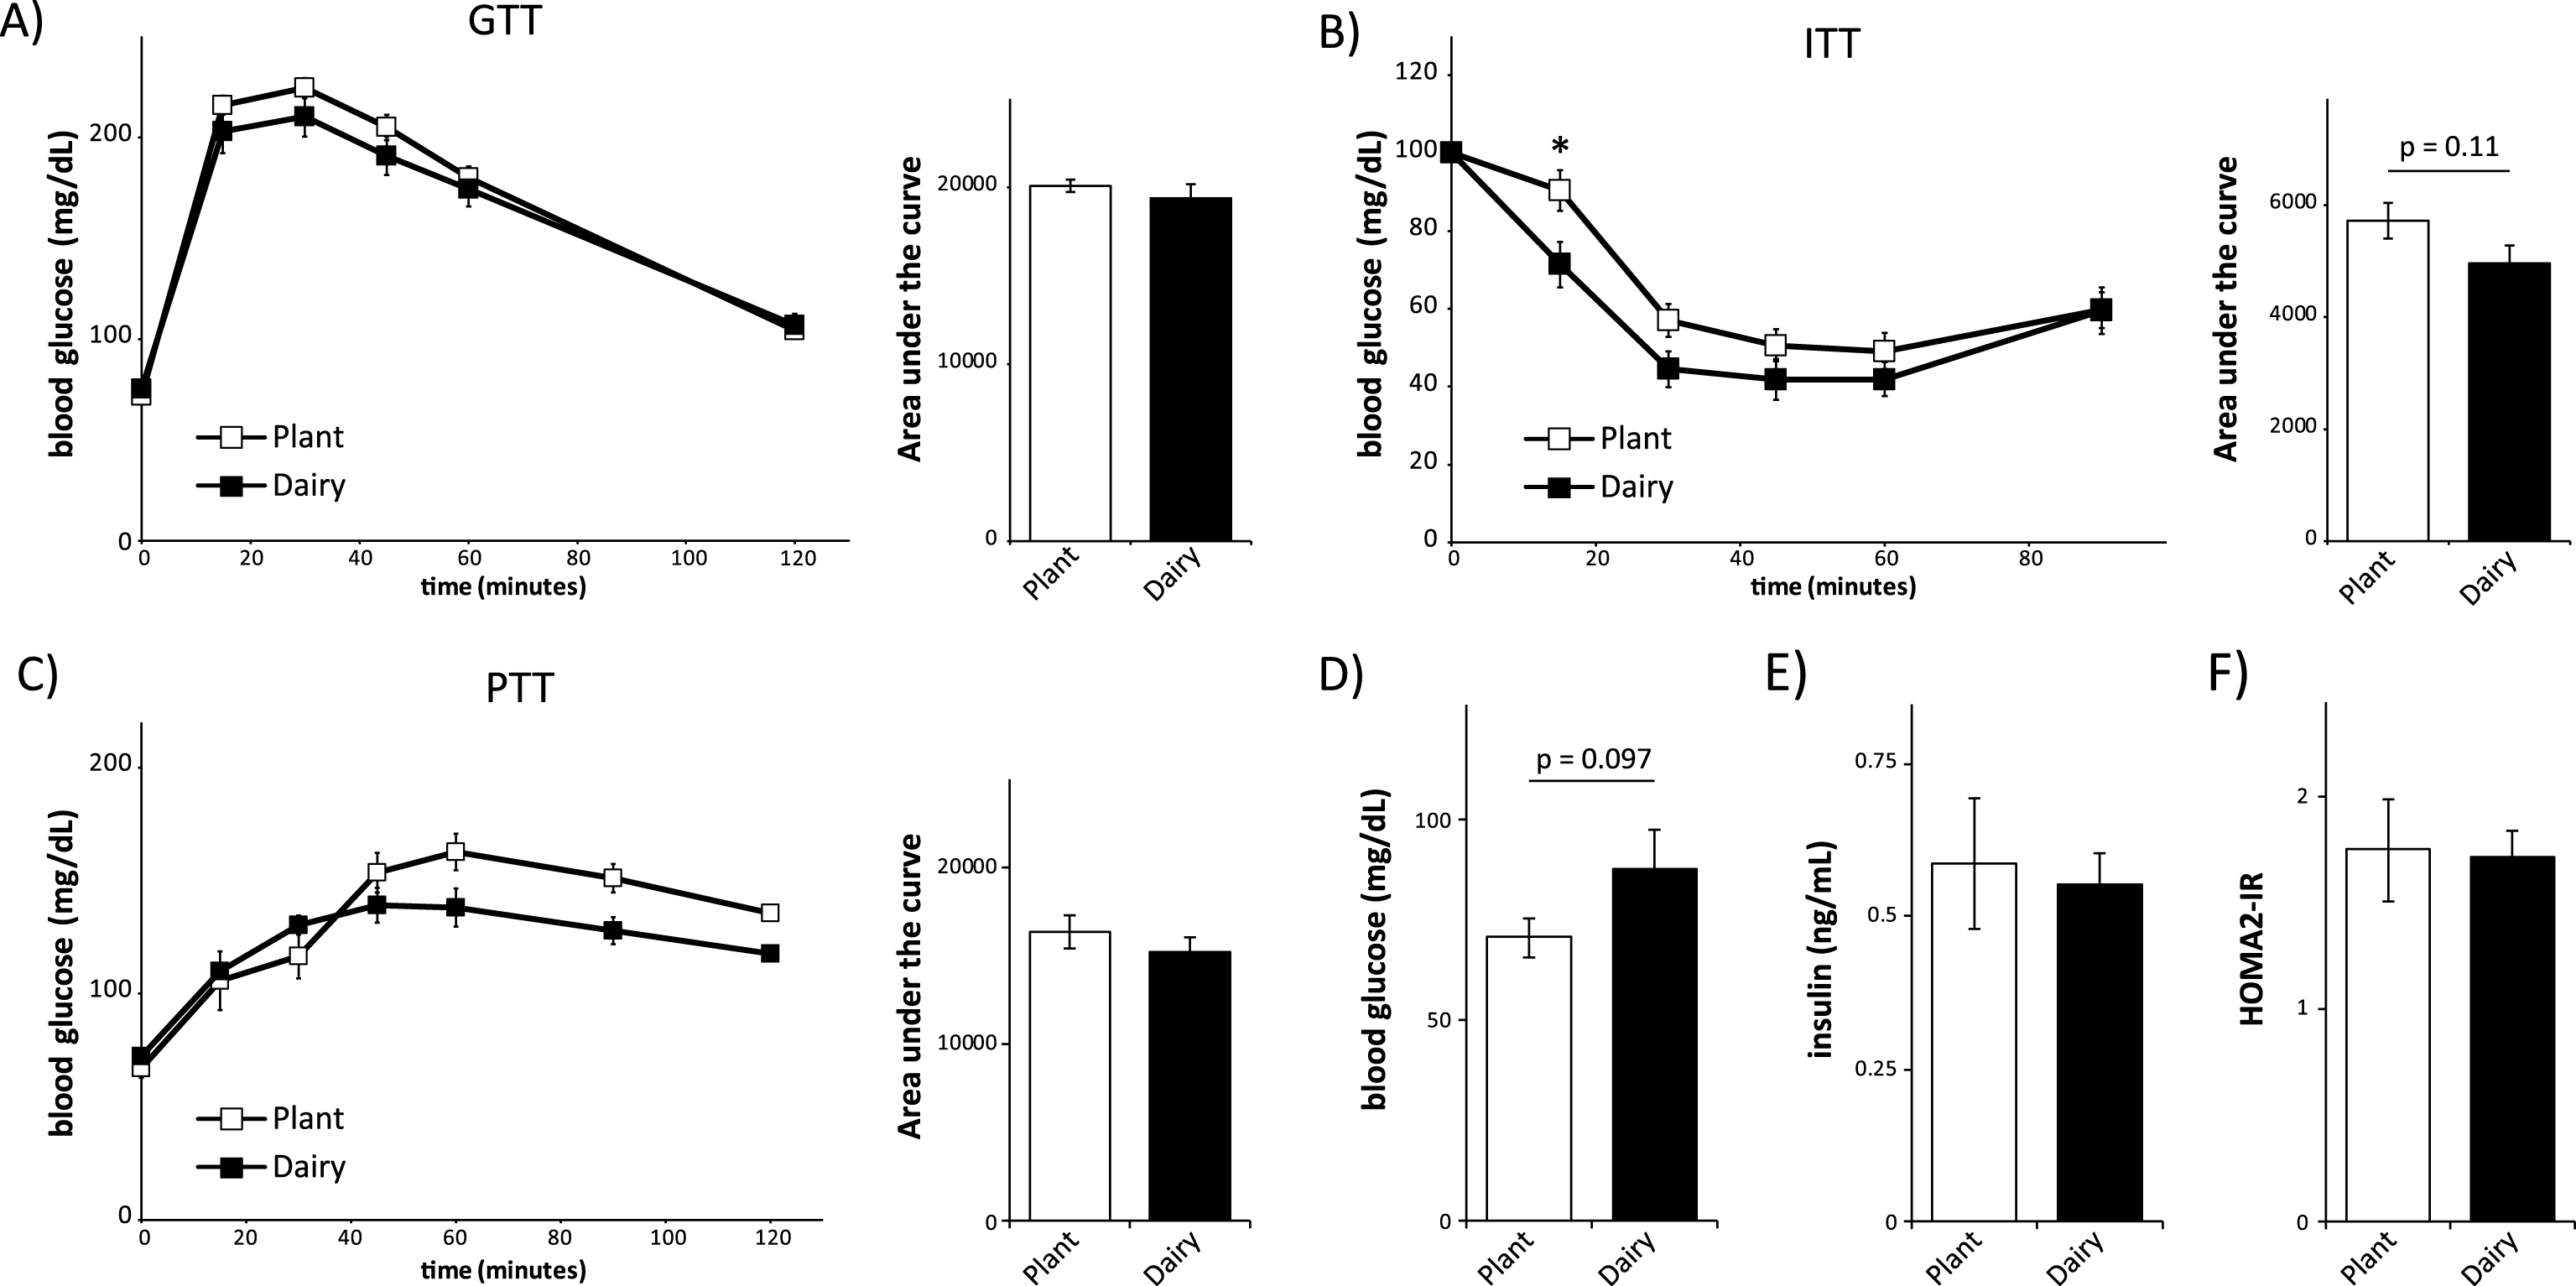 Mice consuming plant or dairy protein diets have similar control of blood glucose. (A-C) Glucose (A), insulin (B) and pyruvate (C) tolerance tests on male C57BL/6J mice fed a diet based on 20% Plant protein or 20% Dairy protein for 3, 4 or 5 weeks, respectively (n = 9/group; Sidak test following repeated-measures ANOVA, * = p < 0.05). Error bars represent SE. (D-F) Mice were fasted overnight and (D) blood glucose and (E) insulin were measured, and (F) the HOMA2-IR was calculated after 6 weeks on the specified diets (n = 9/group; two-tailed t-test, * = p < 0.05). Error bars represent SE.